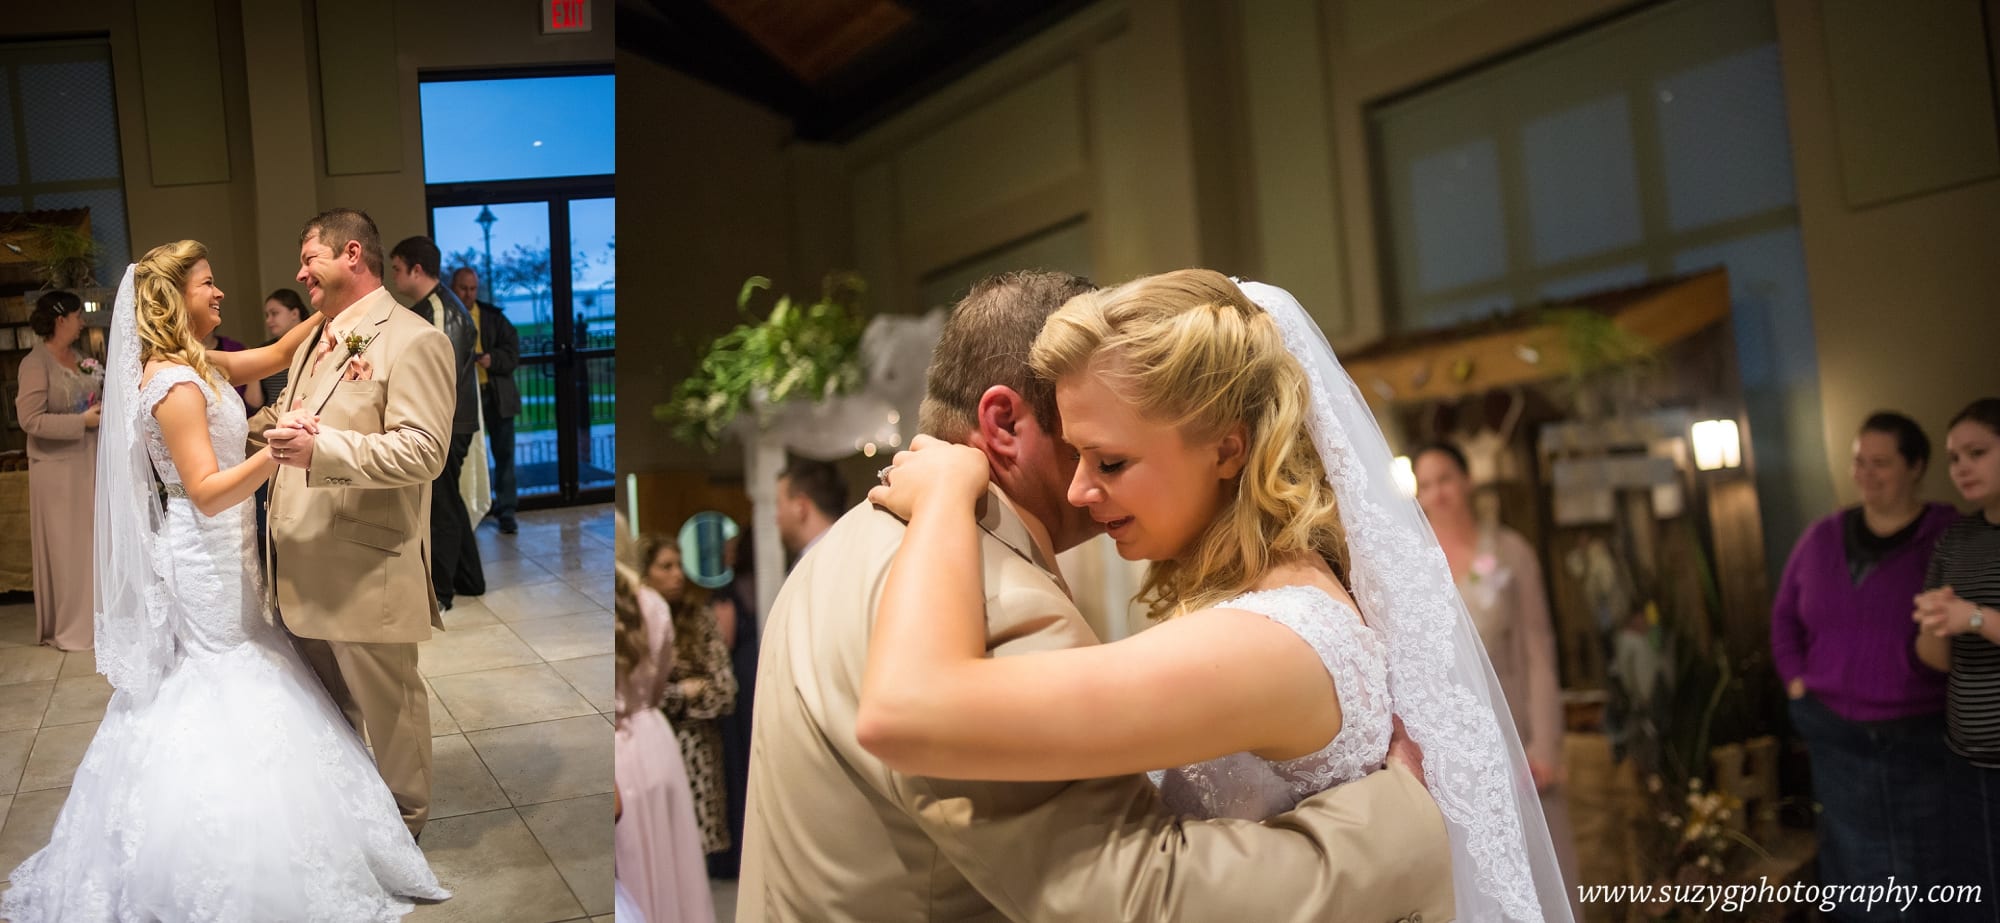 vows by victoria-lake charles-wedding-photography-suzy g-photography-suzygphotography_0082